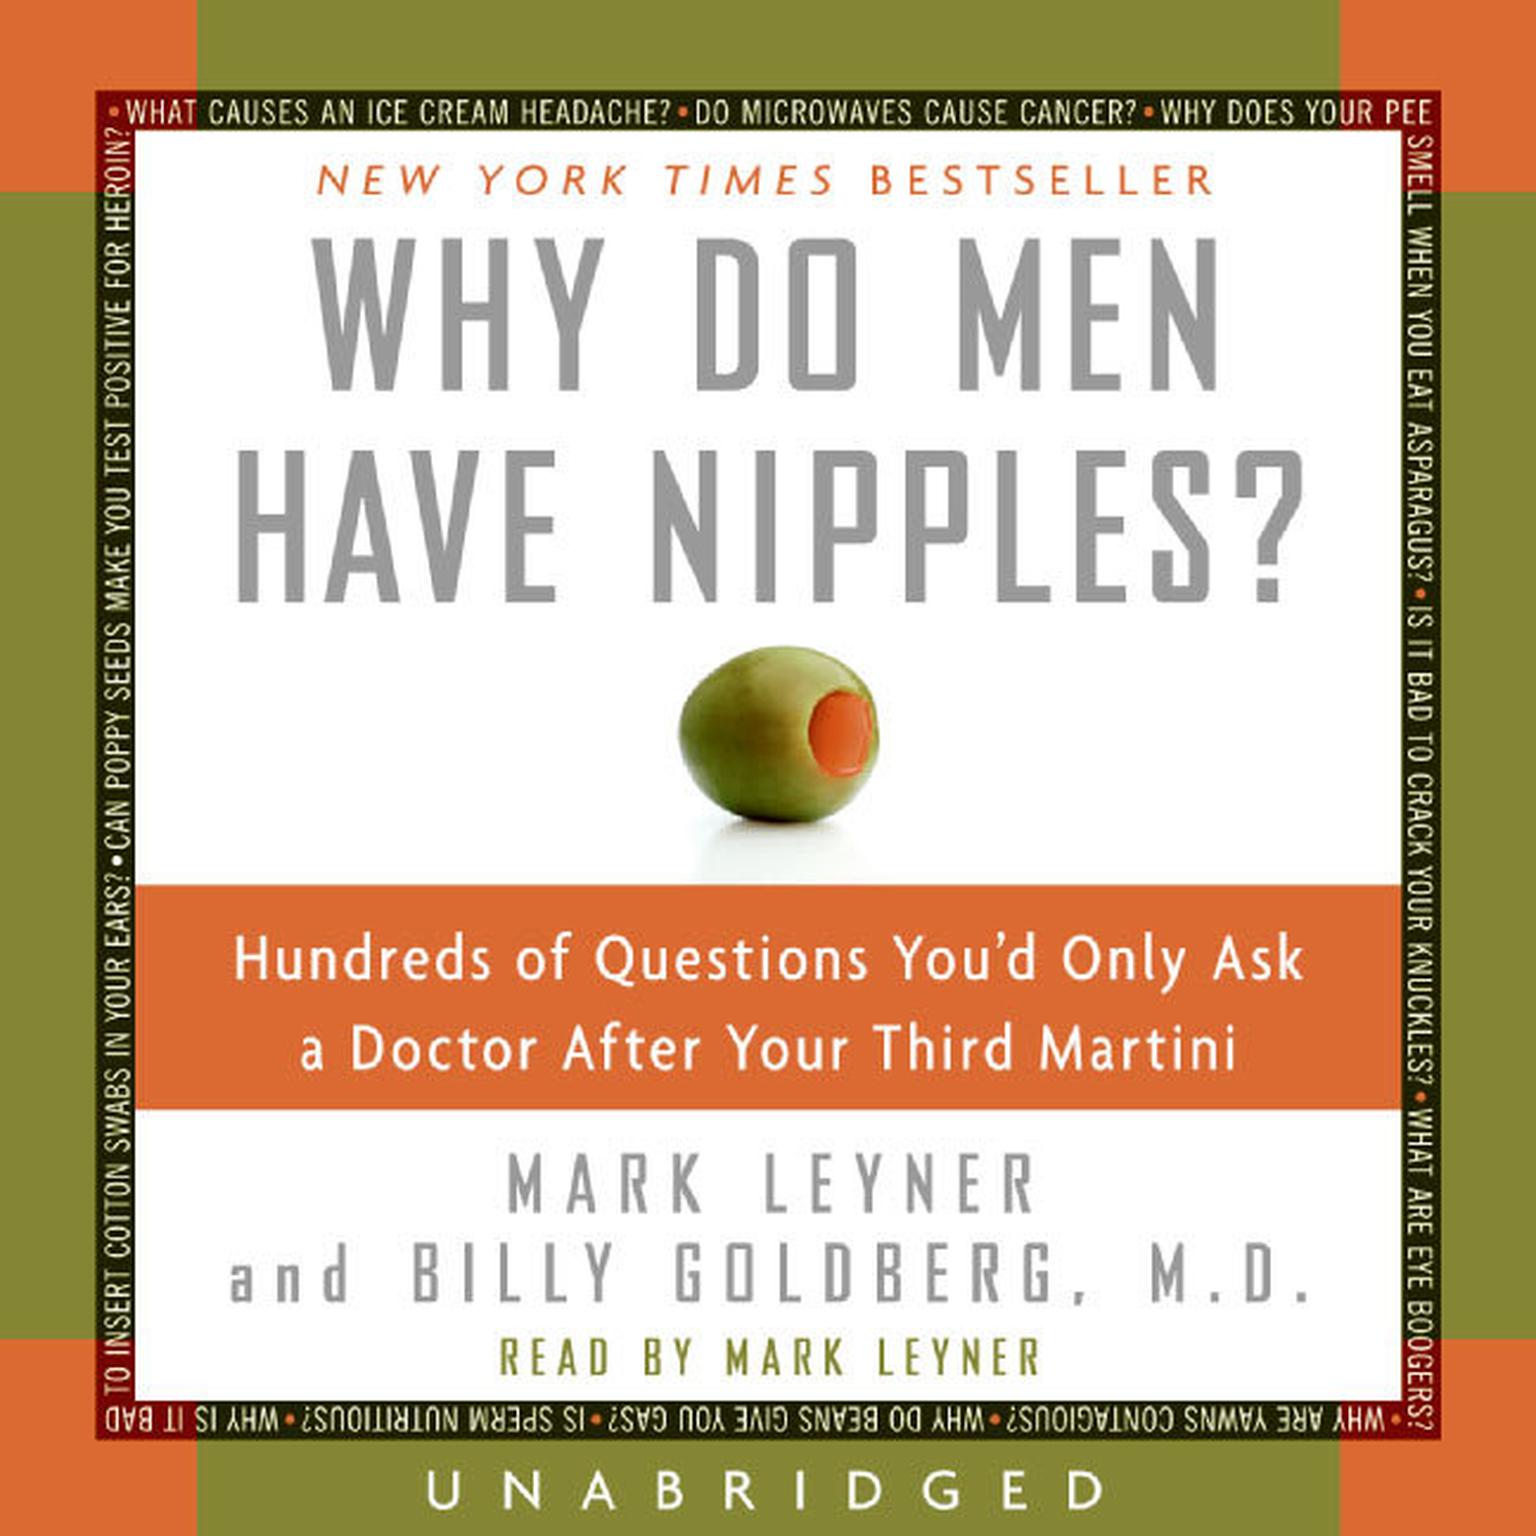 Why Do Men Have Nipples?: Hundreds of Questions Youd Only Ask a Doctor After Your Third Martini Audiobook, by Mark Leyner